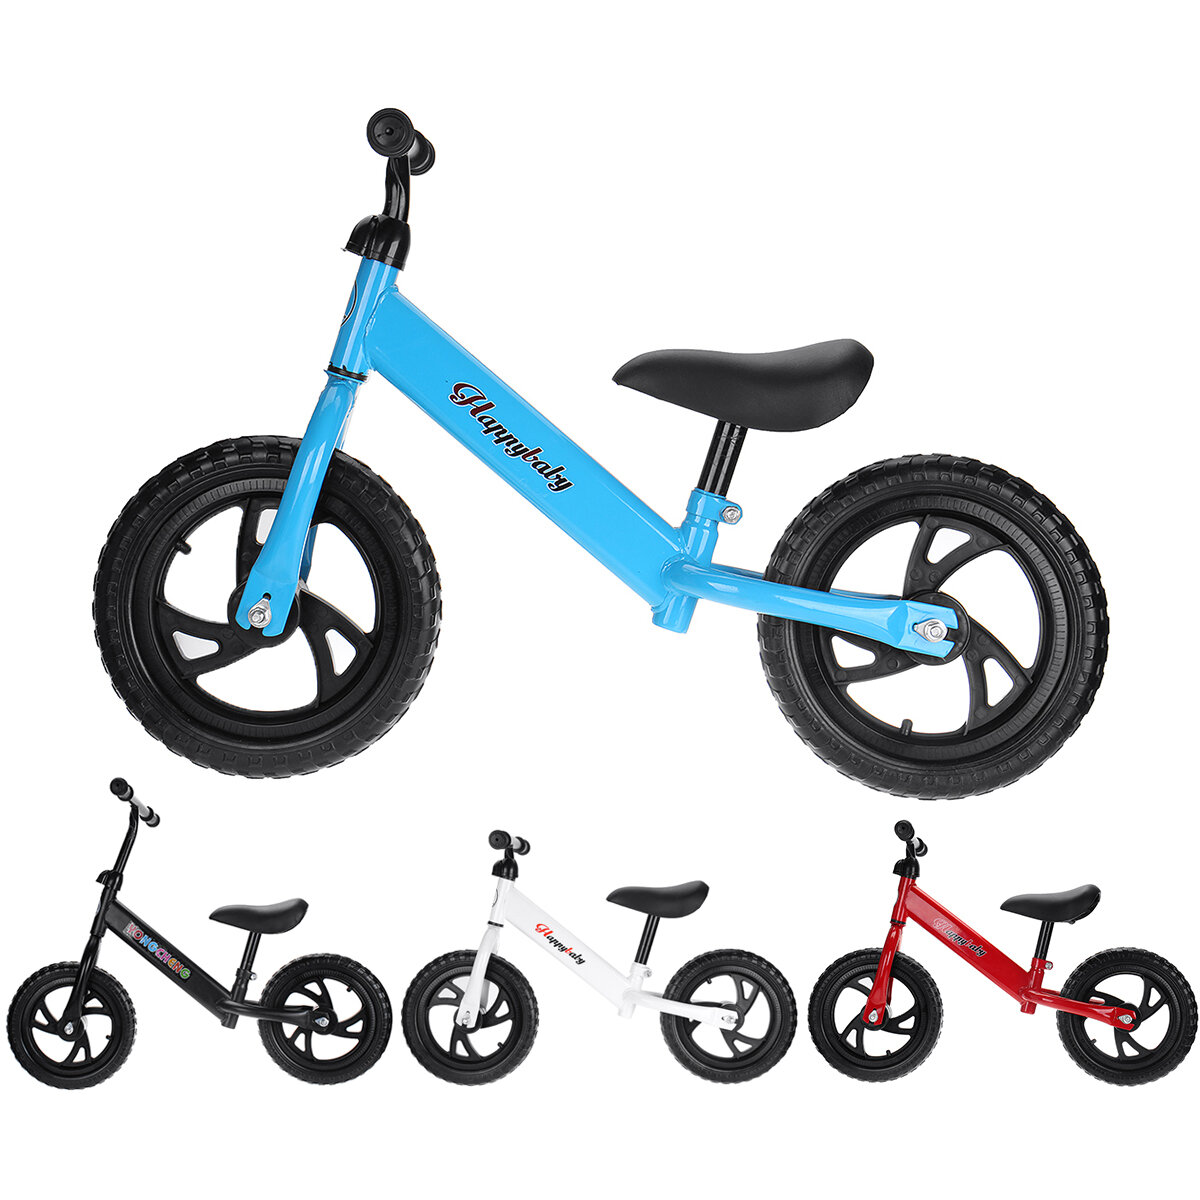 Kids Portable Adjustable No Pedal Best Balance Bike for Children Aged 2-7 Toddler Educational Bicycle Gift for Boys＆Girl